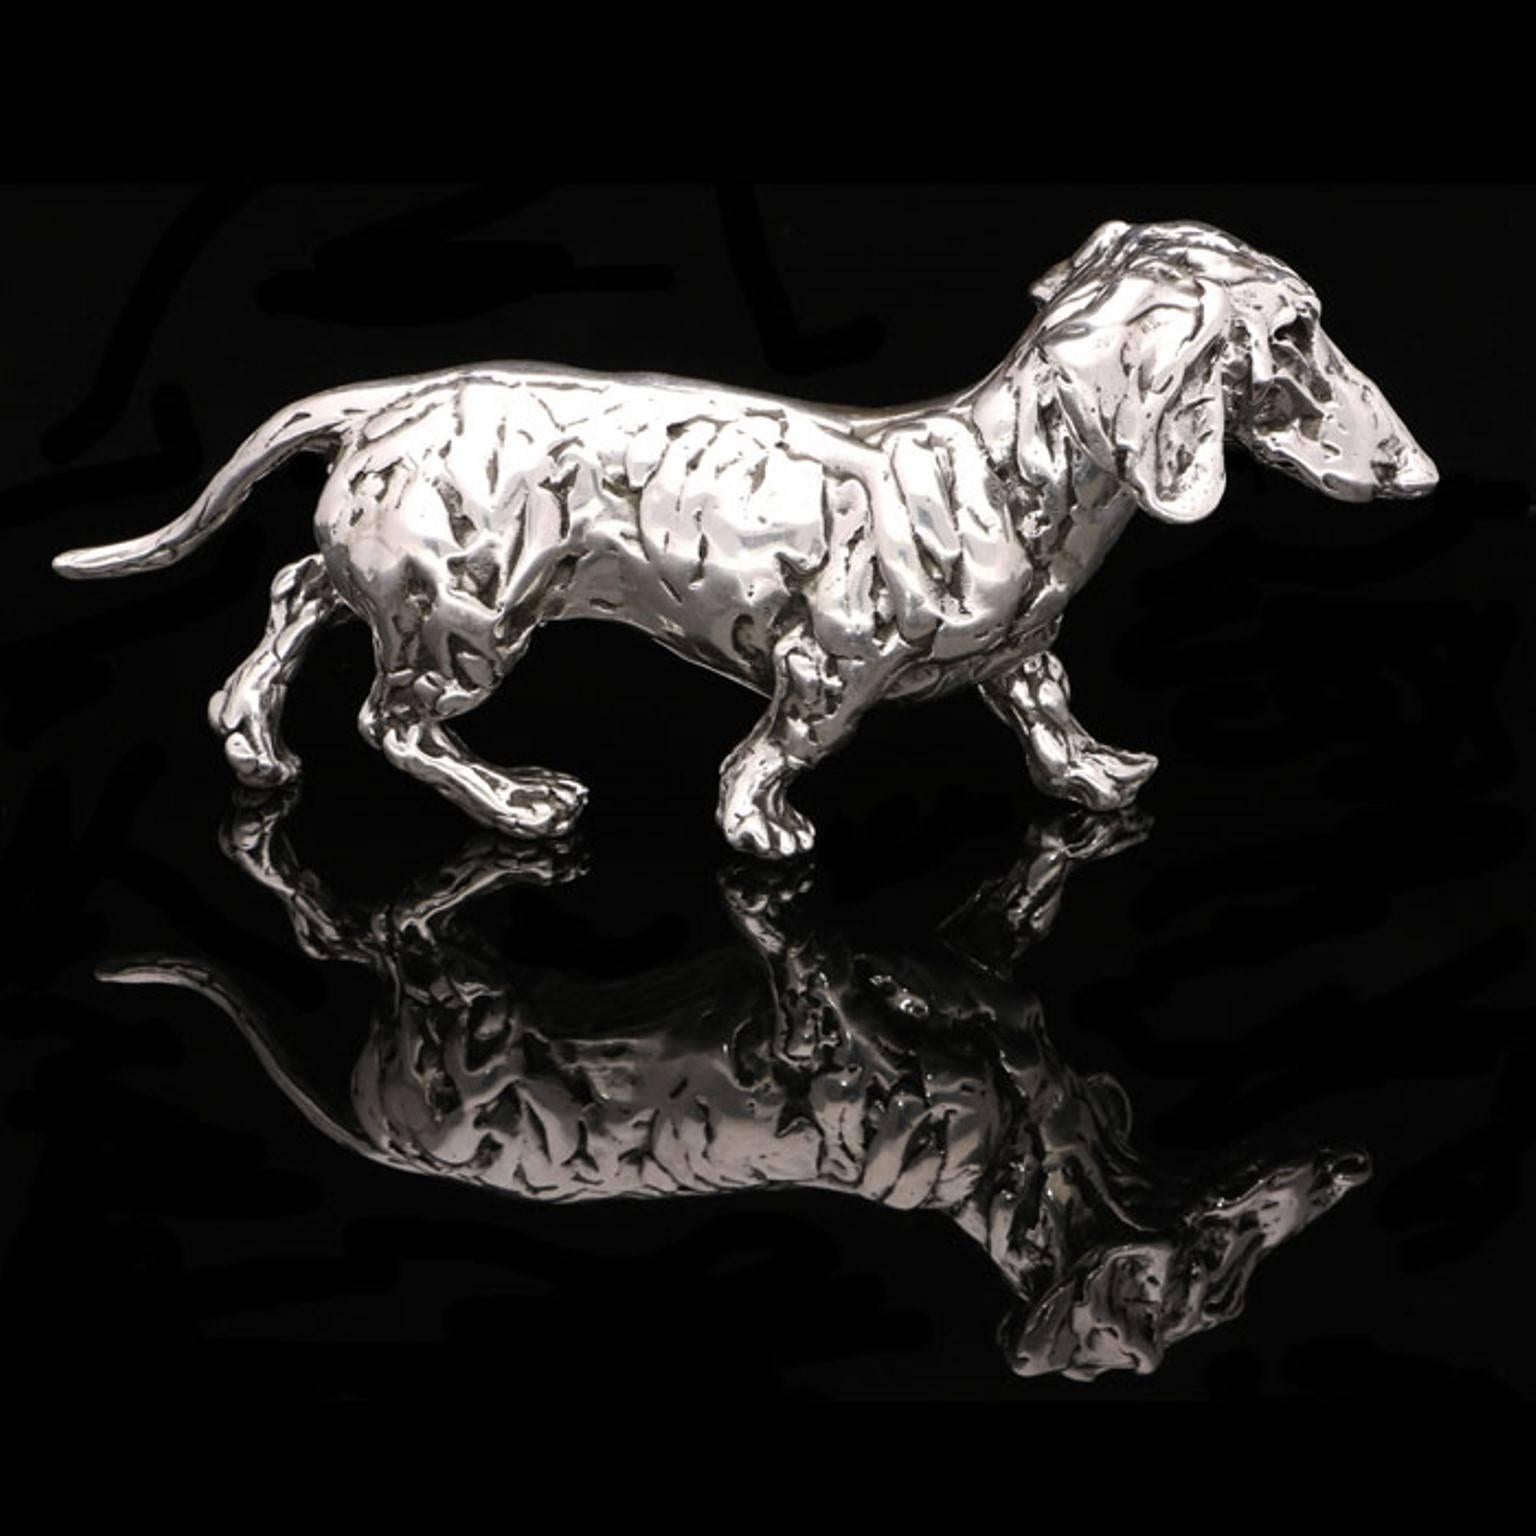 A ‘Dachshund’ sterling silver sculpture by Lucy Kinsella, the limited edition finely modelled dachshund with characteristic elongated body and short legs is depicted striding jauntily along with something of a purposeful expression on his face. 